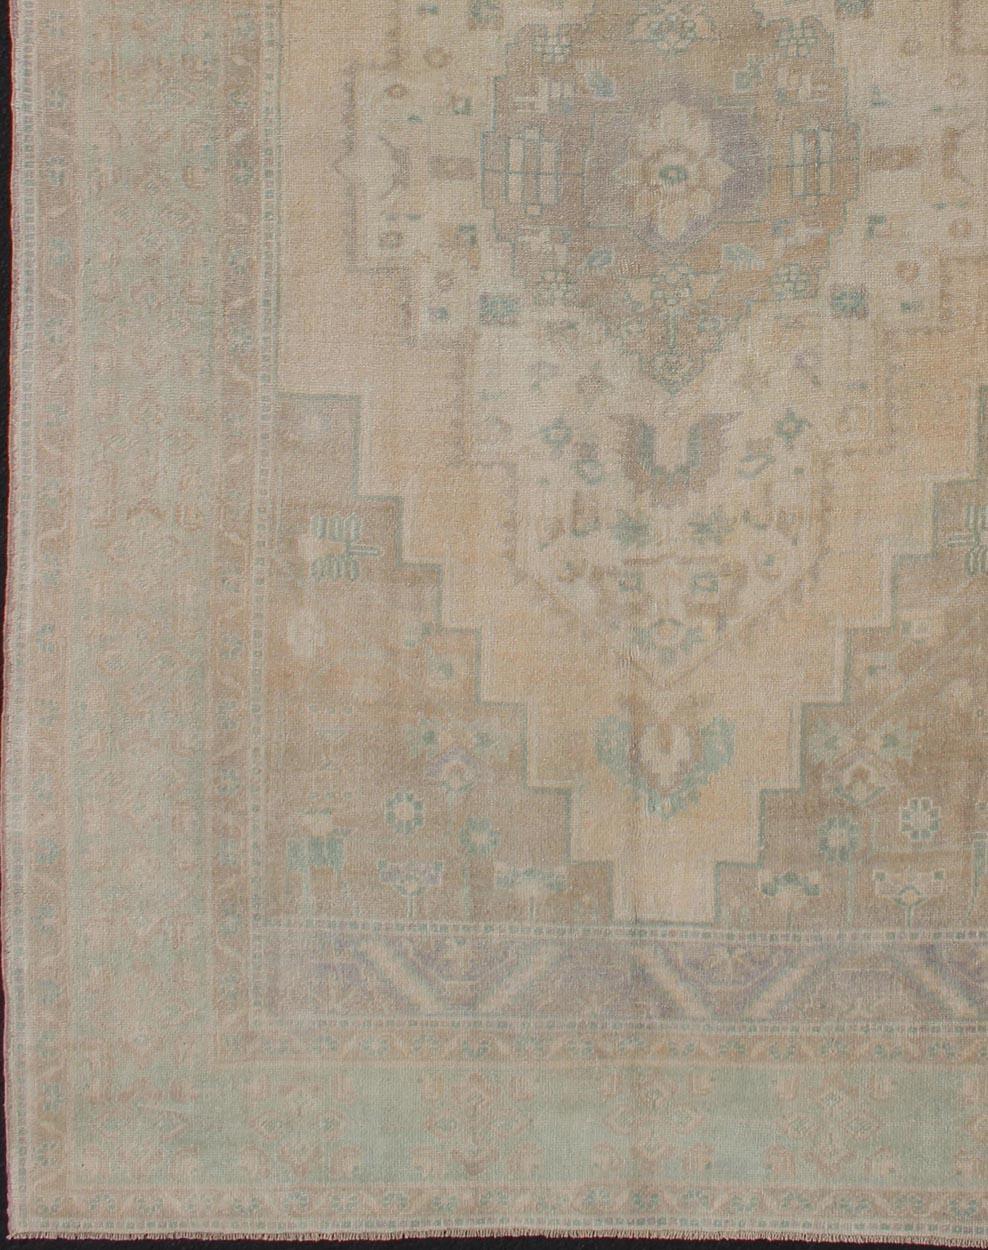 Faded vintage Turkish Oushak Medallion rug in taupe, tan and light peach, rug EN-179139, country of origin / type: Turkey / Oushak, circa mid-20th century. Pale Oushak, vintage Oushak

This faded vintage Oushak rug (circa mid-20th century)